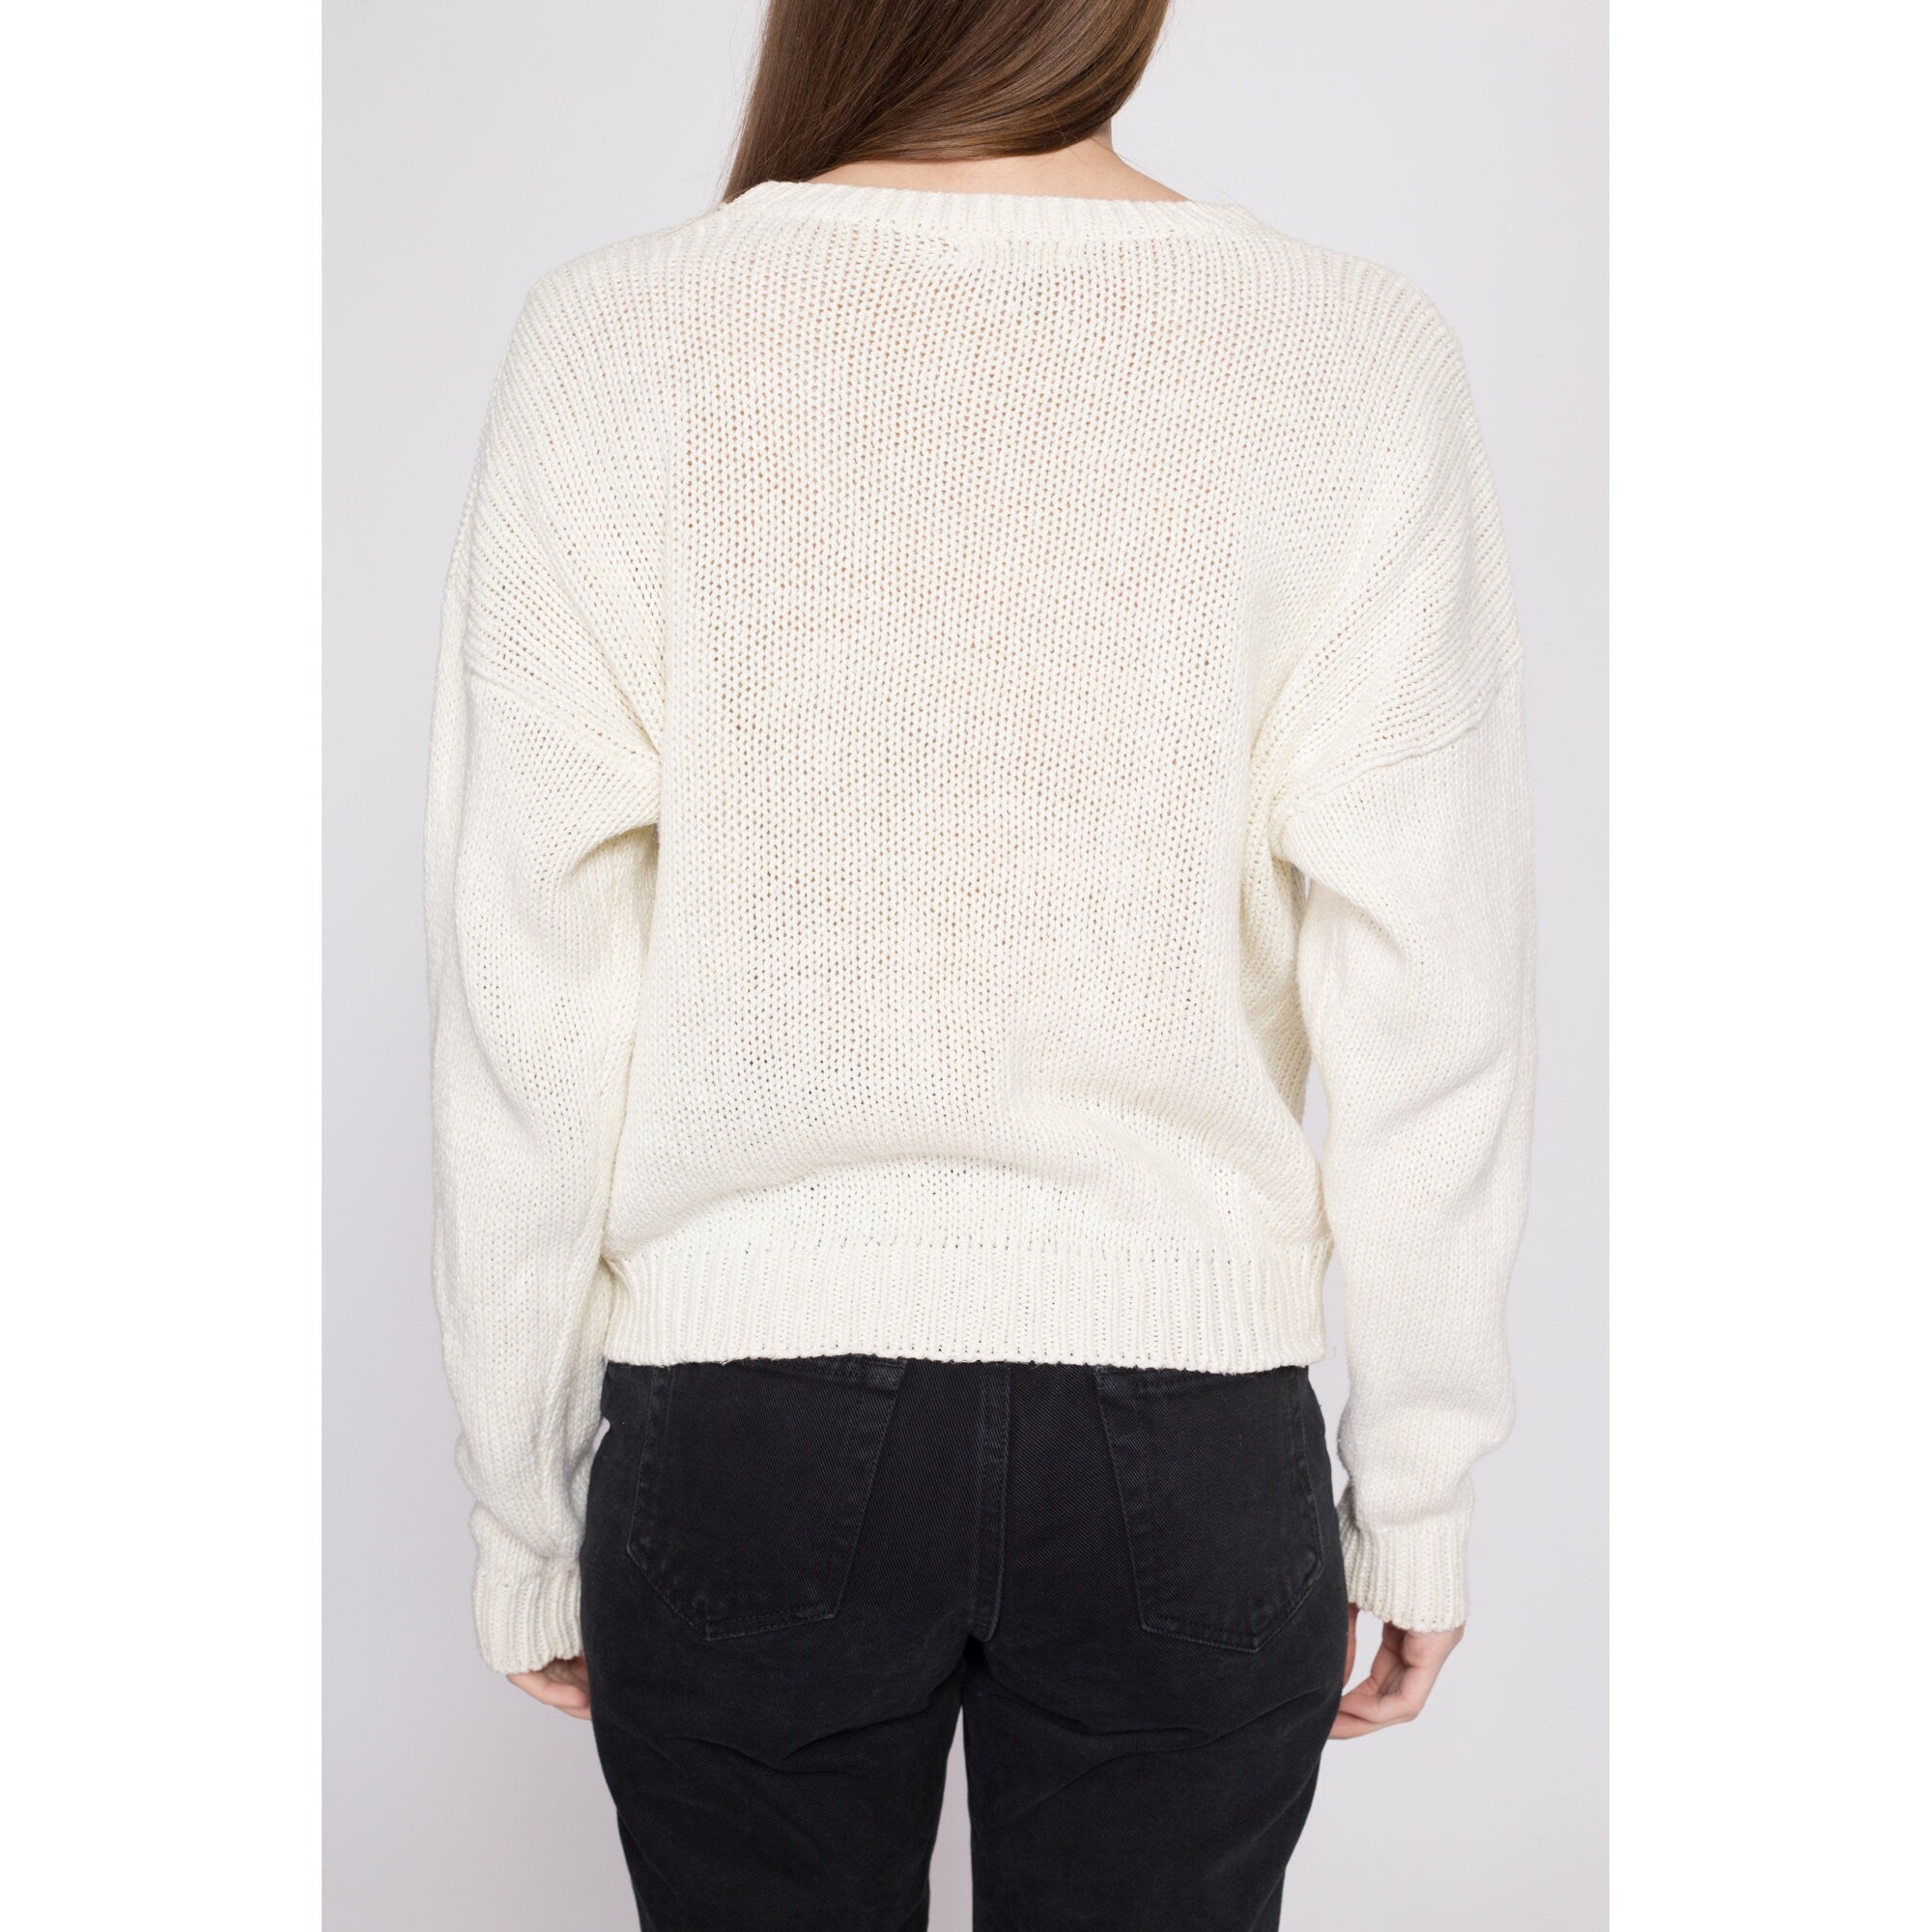 90s White Floral Cable Knit Sweater - Medium – Flying Apple Vintage